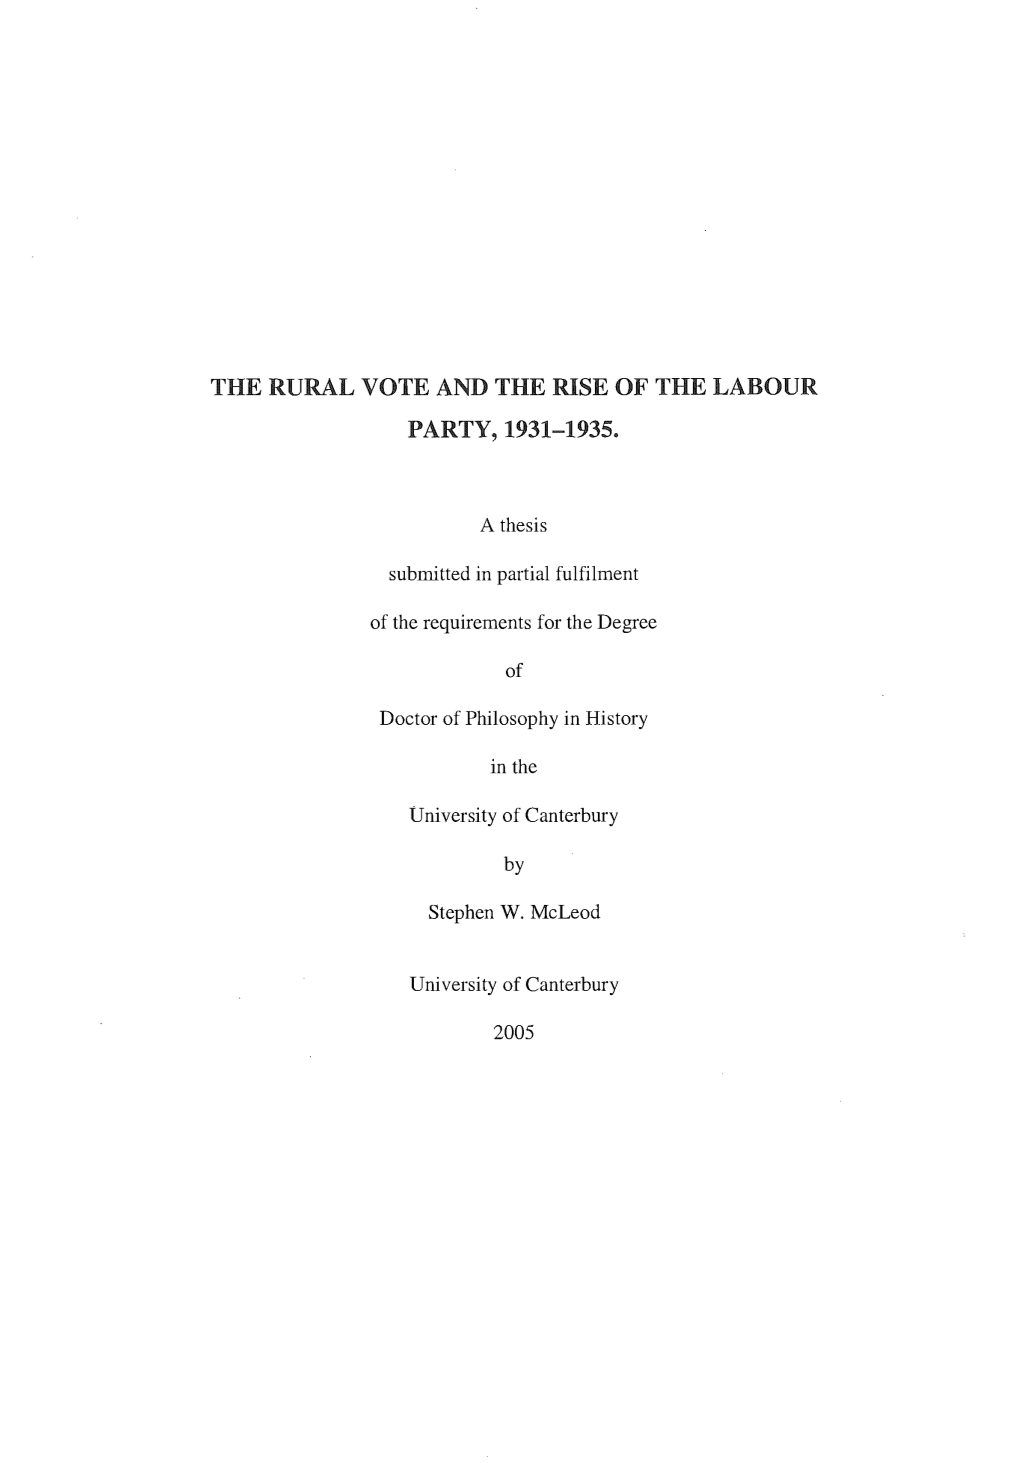 The Rural Vote and the Rise of the Labour Party, 1931-1935